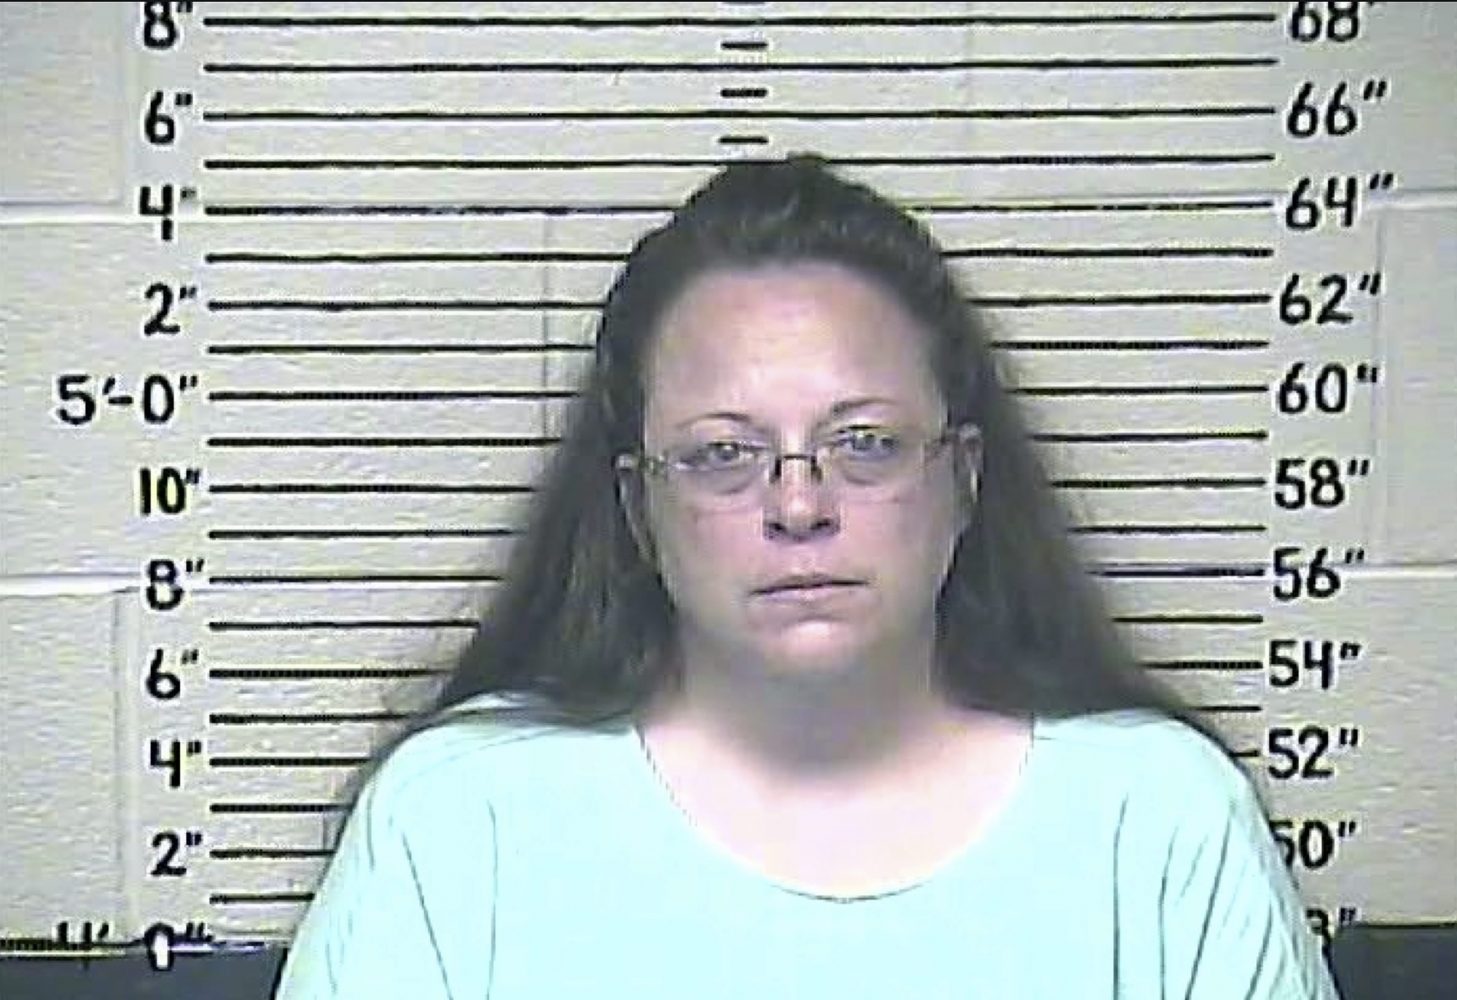 epa04911995 A Carter County Detention Center handout image released 03 September 2015 shows Rowan County Kentucky Clerk Kim Davis in a booking photo after being put in jail for contempt of court for refusing several court orders to start issuing marriage licenses in Rowan County, Kentucky, USA, 03 September 2015. The US Supreme Court ruled in June 2015 that gay couples had a constitutional right in the US to get married.  EPA/CARTER COUNTY DETENTION CENTER /  HANDOUT EDITORIAL USE ONLY/NO SALES ORG XMIT: MCX01